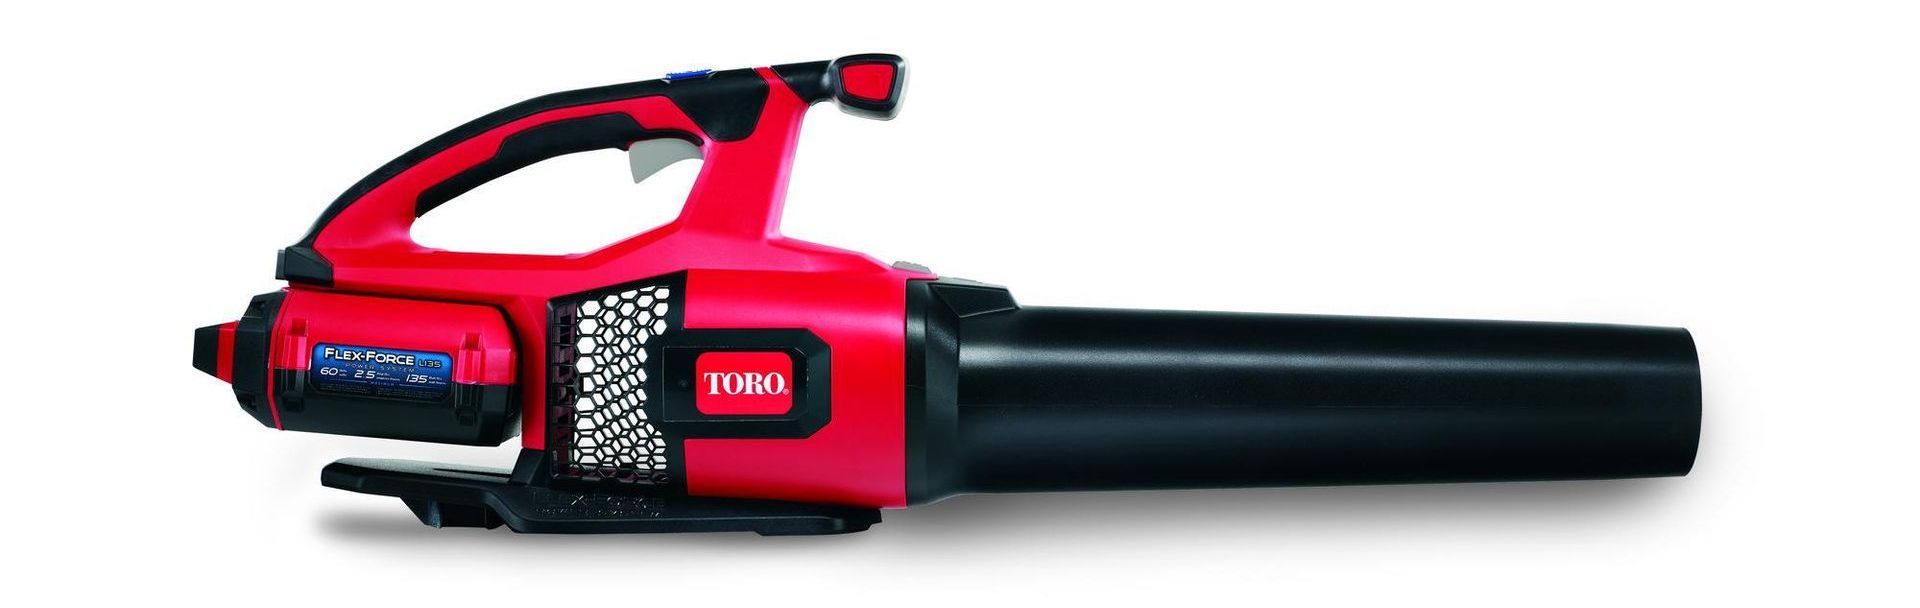 A red and black toro  blower on a white background.